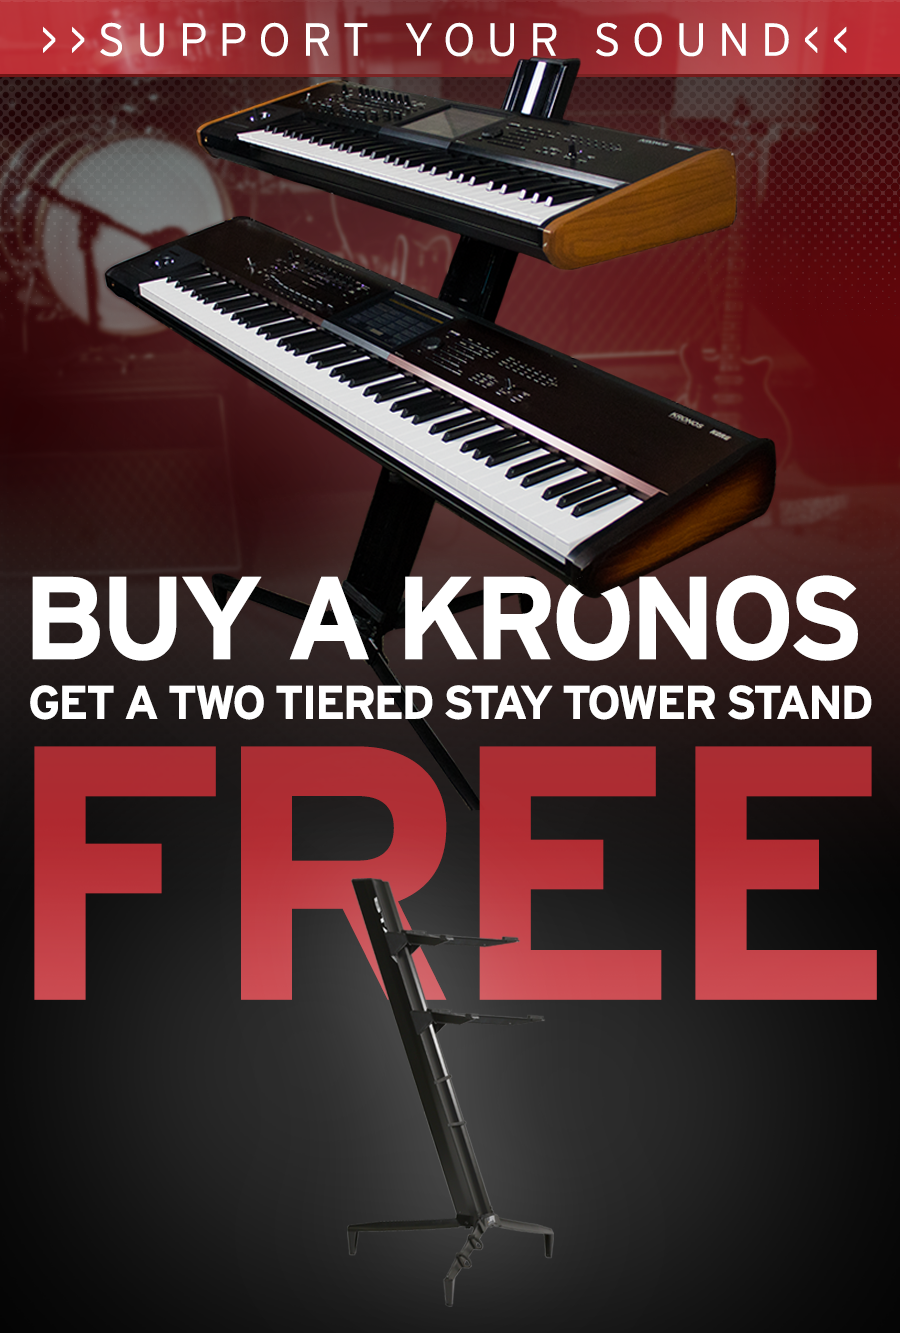 Buy a Kronos Get a Two Tiered Stay Tower Stand